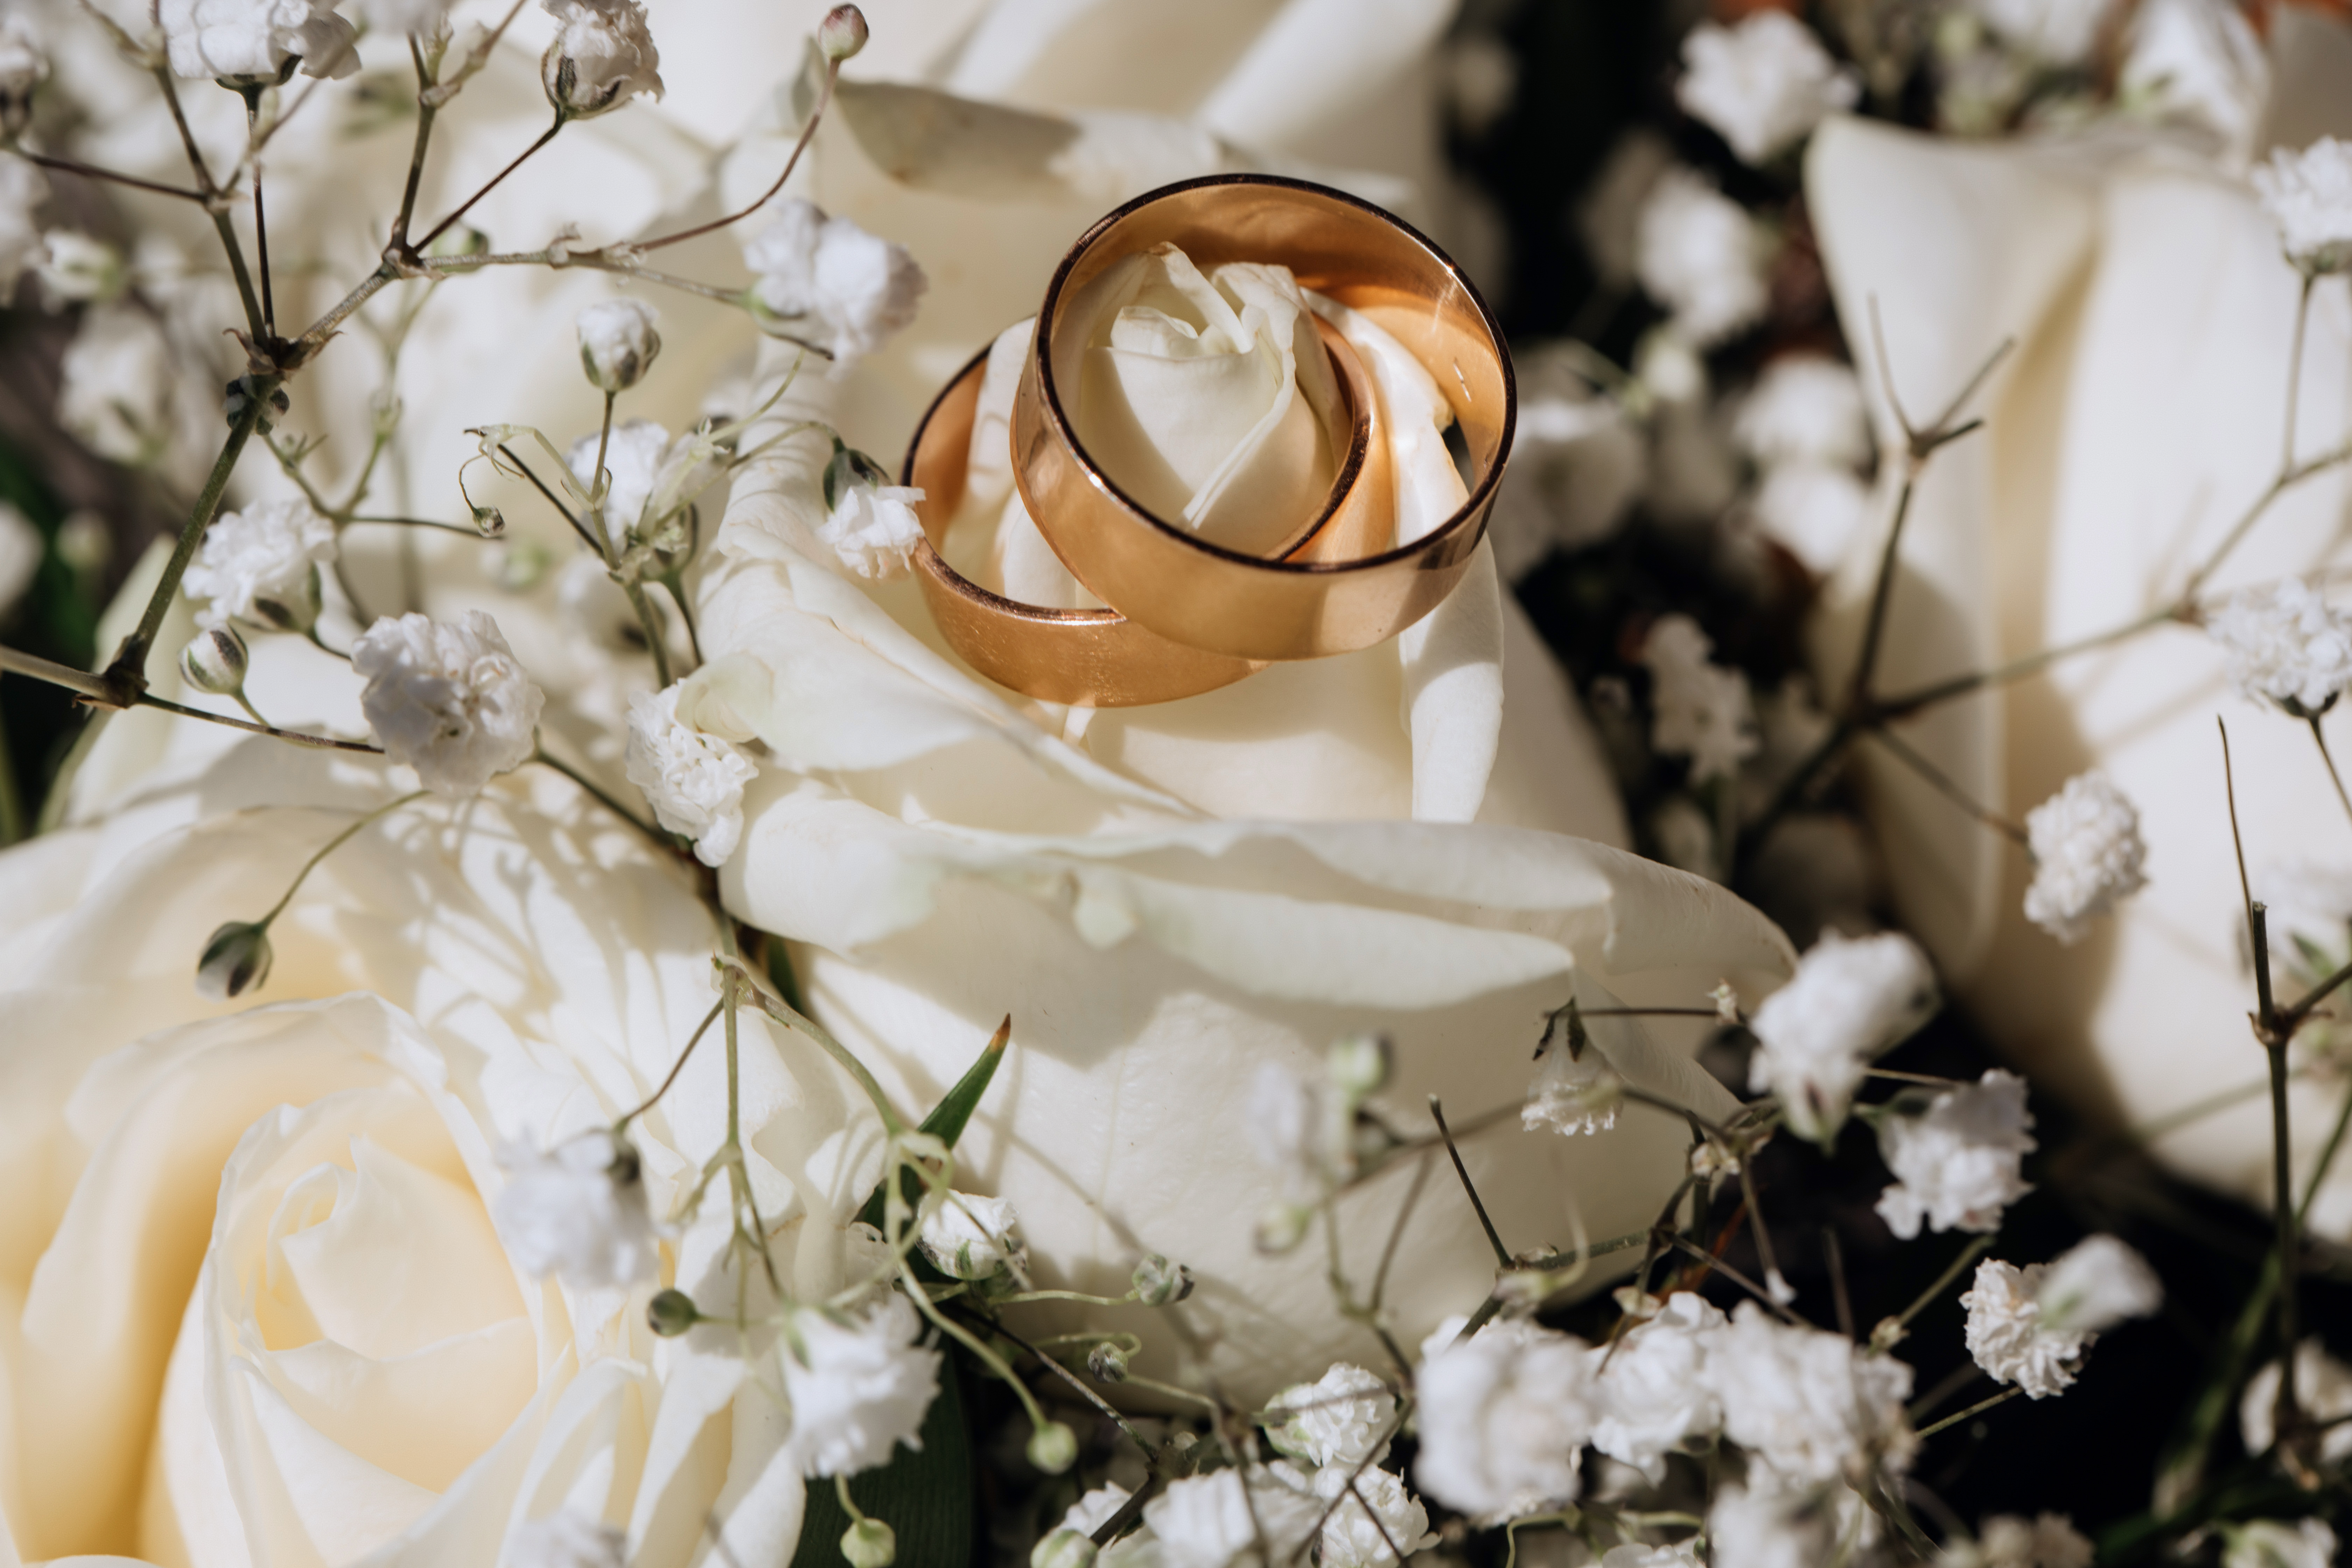 golden-wedding-rings-white-rose-from-wedding-bouquet